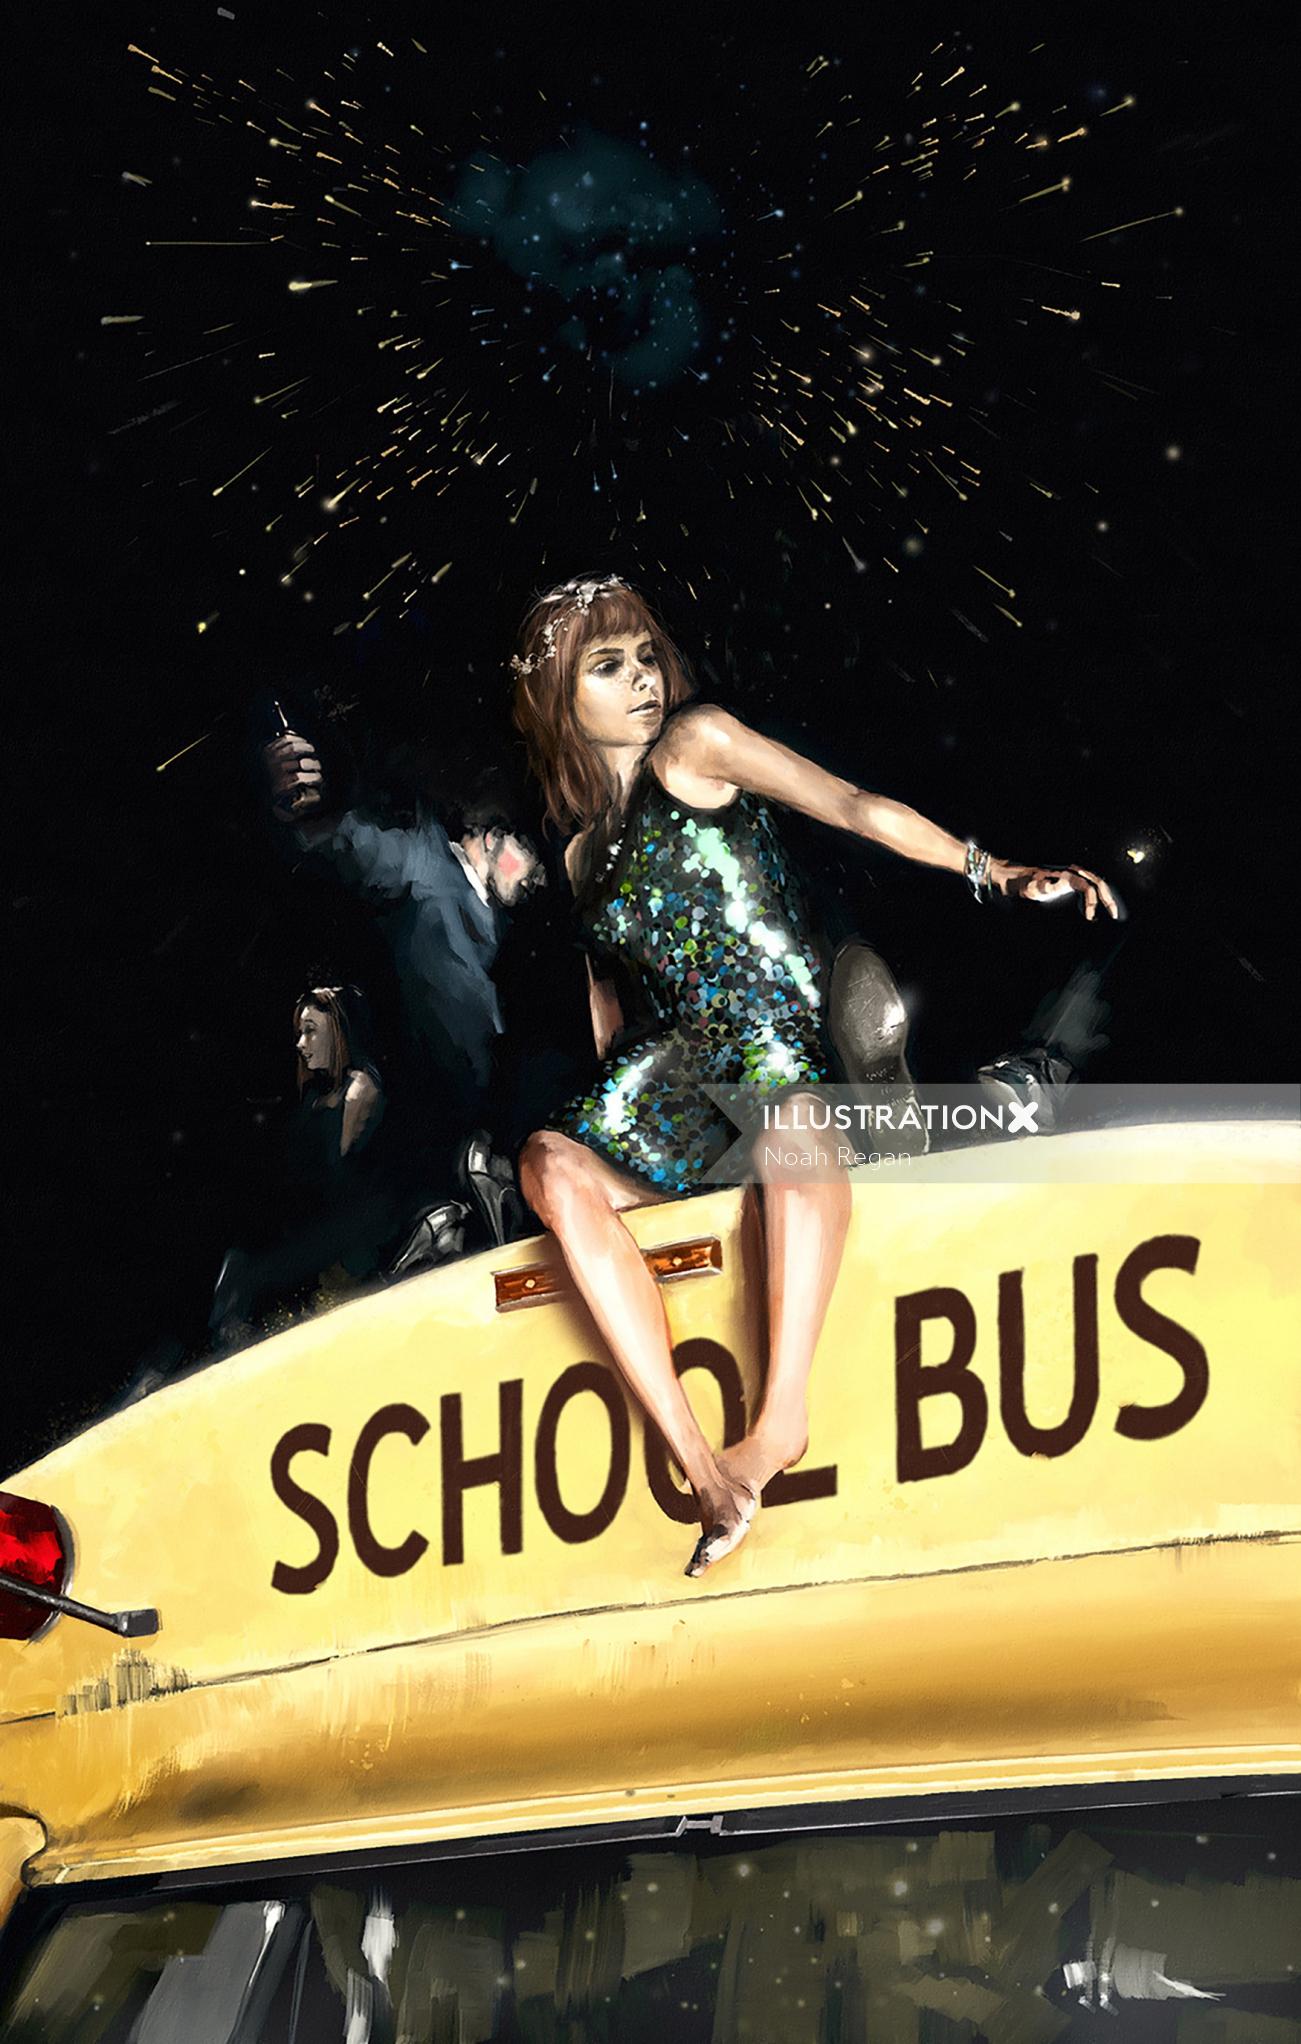 Gens Prom Night girl sur bus scolaire